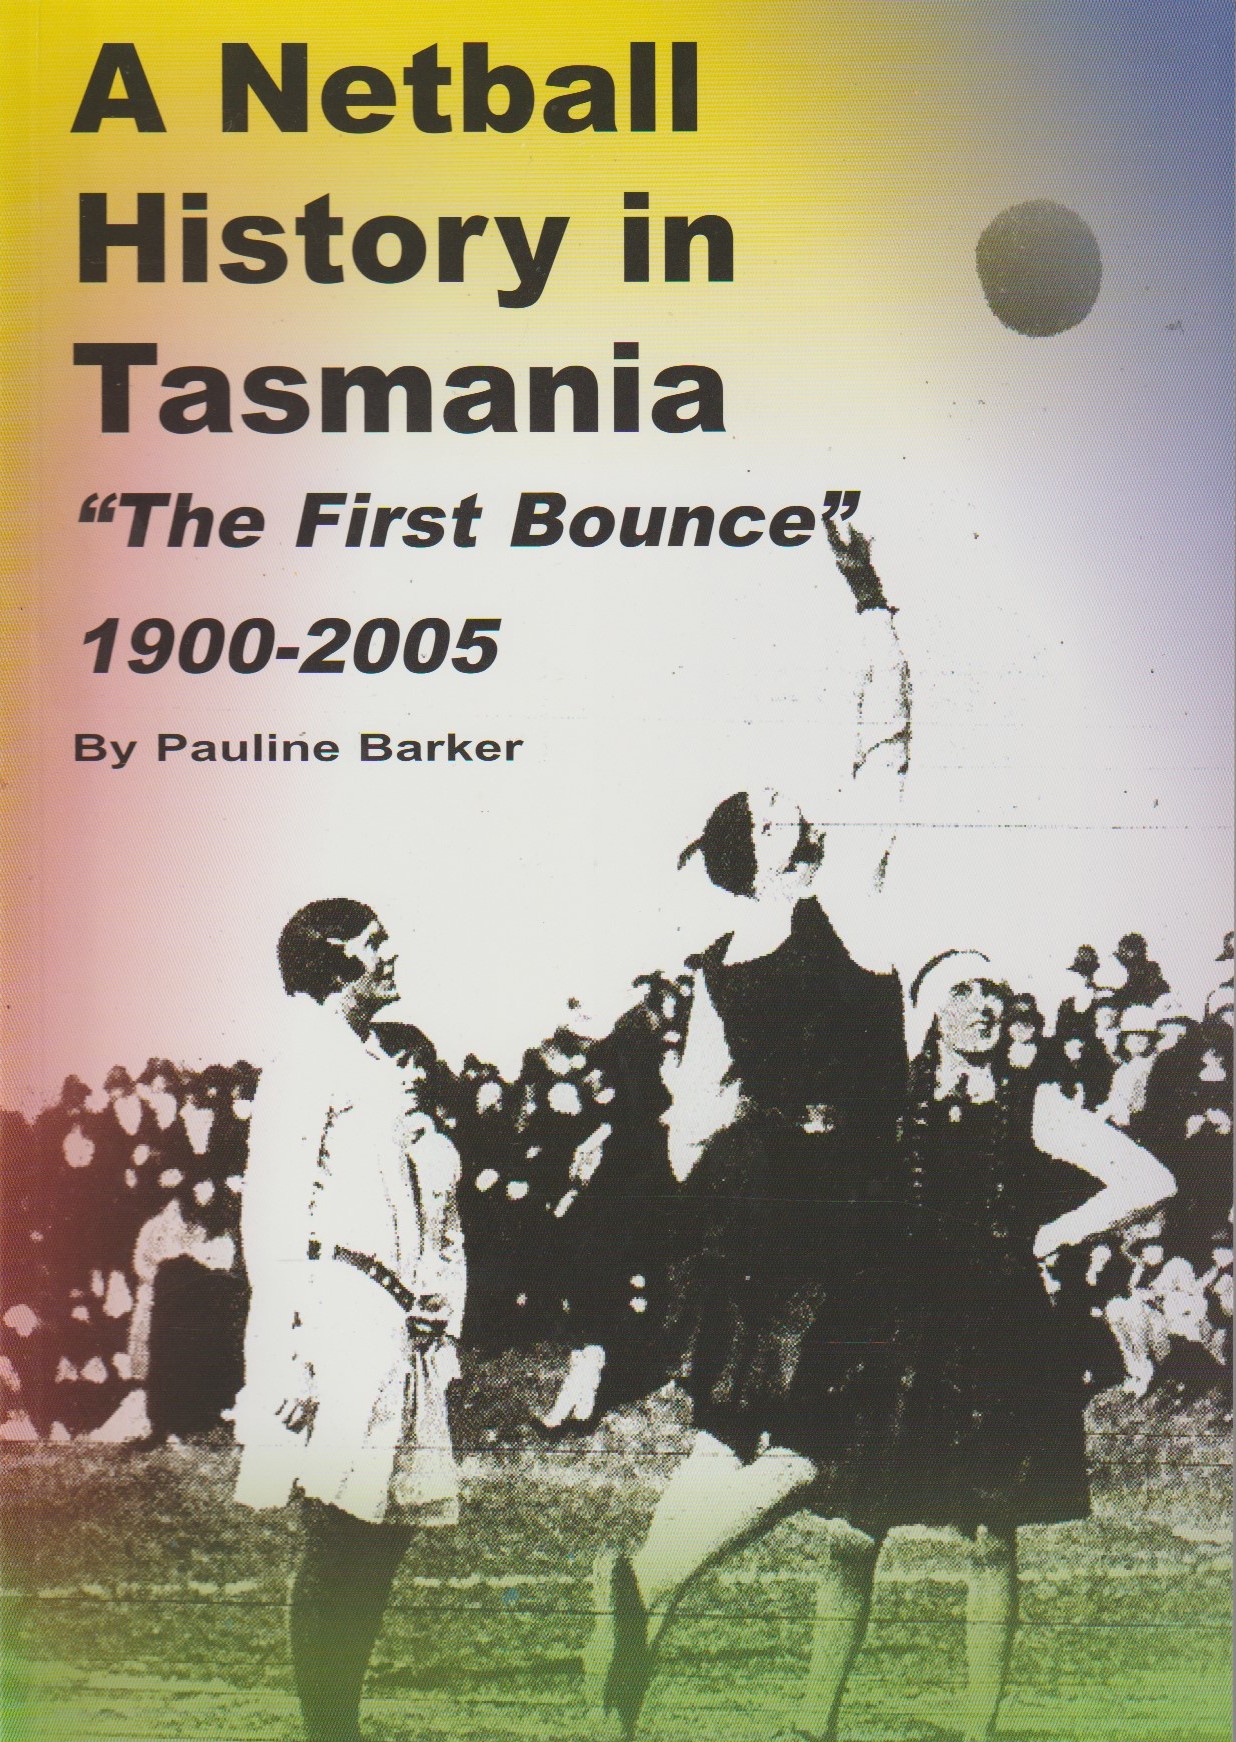 A Netball History in Tasmania - The First Bounce 1900-2005